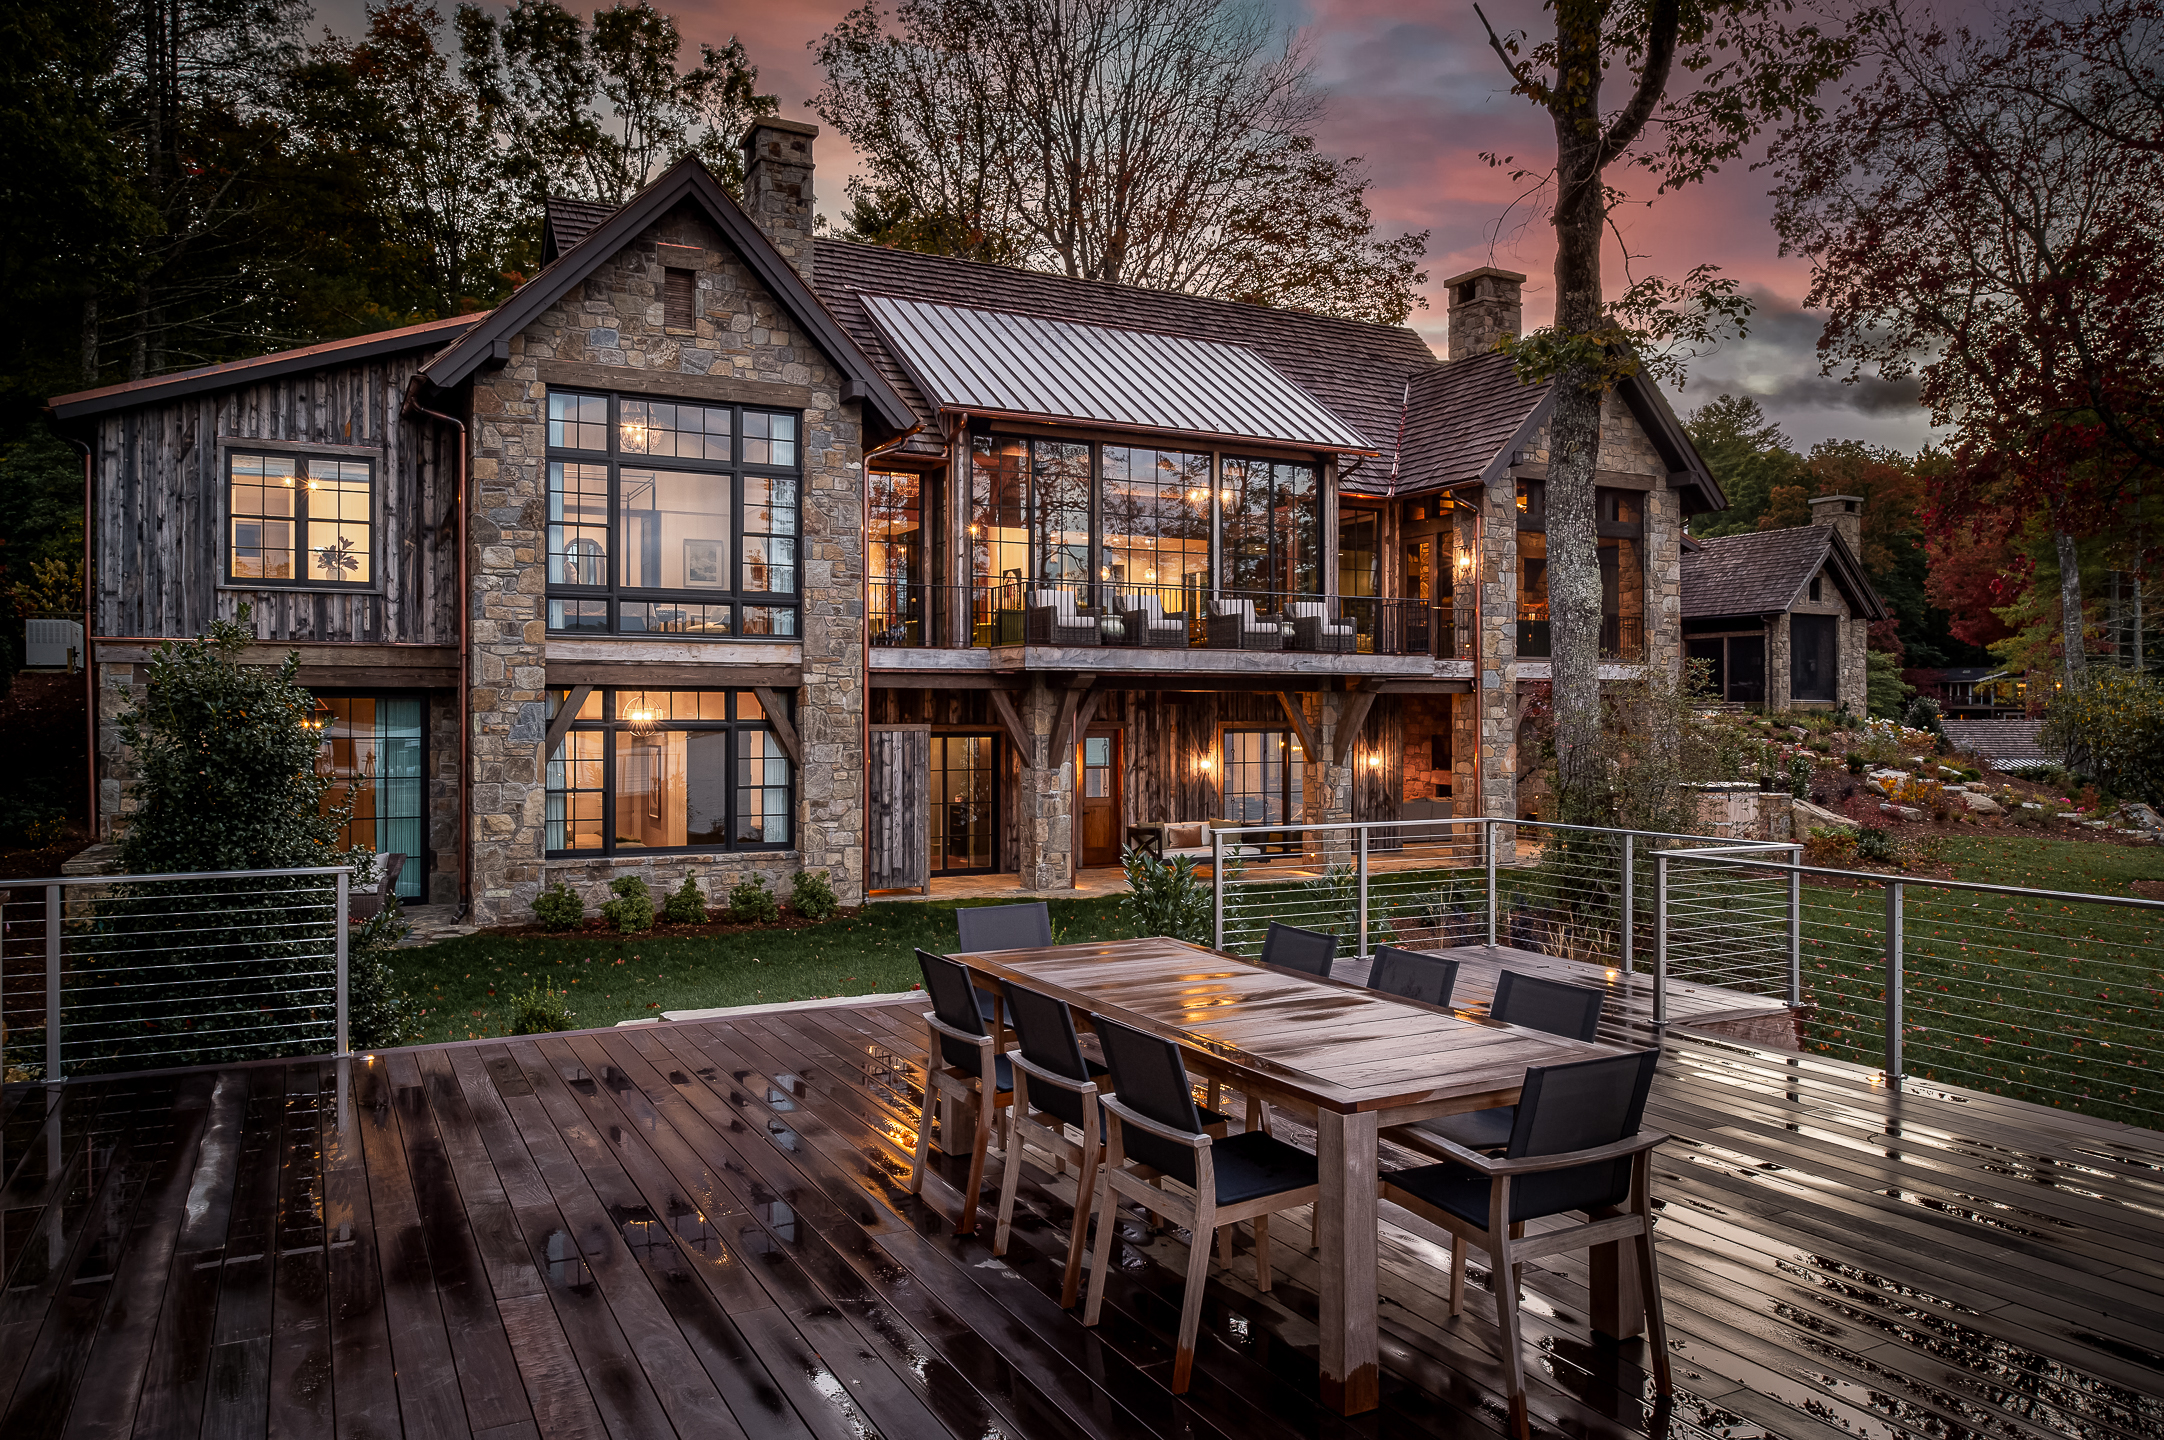 A home with a deck and outdoor dining area at dusk. captured by professional architectural photographer in Asheville, North Carolina